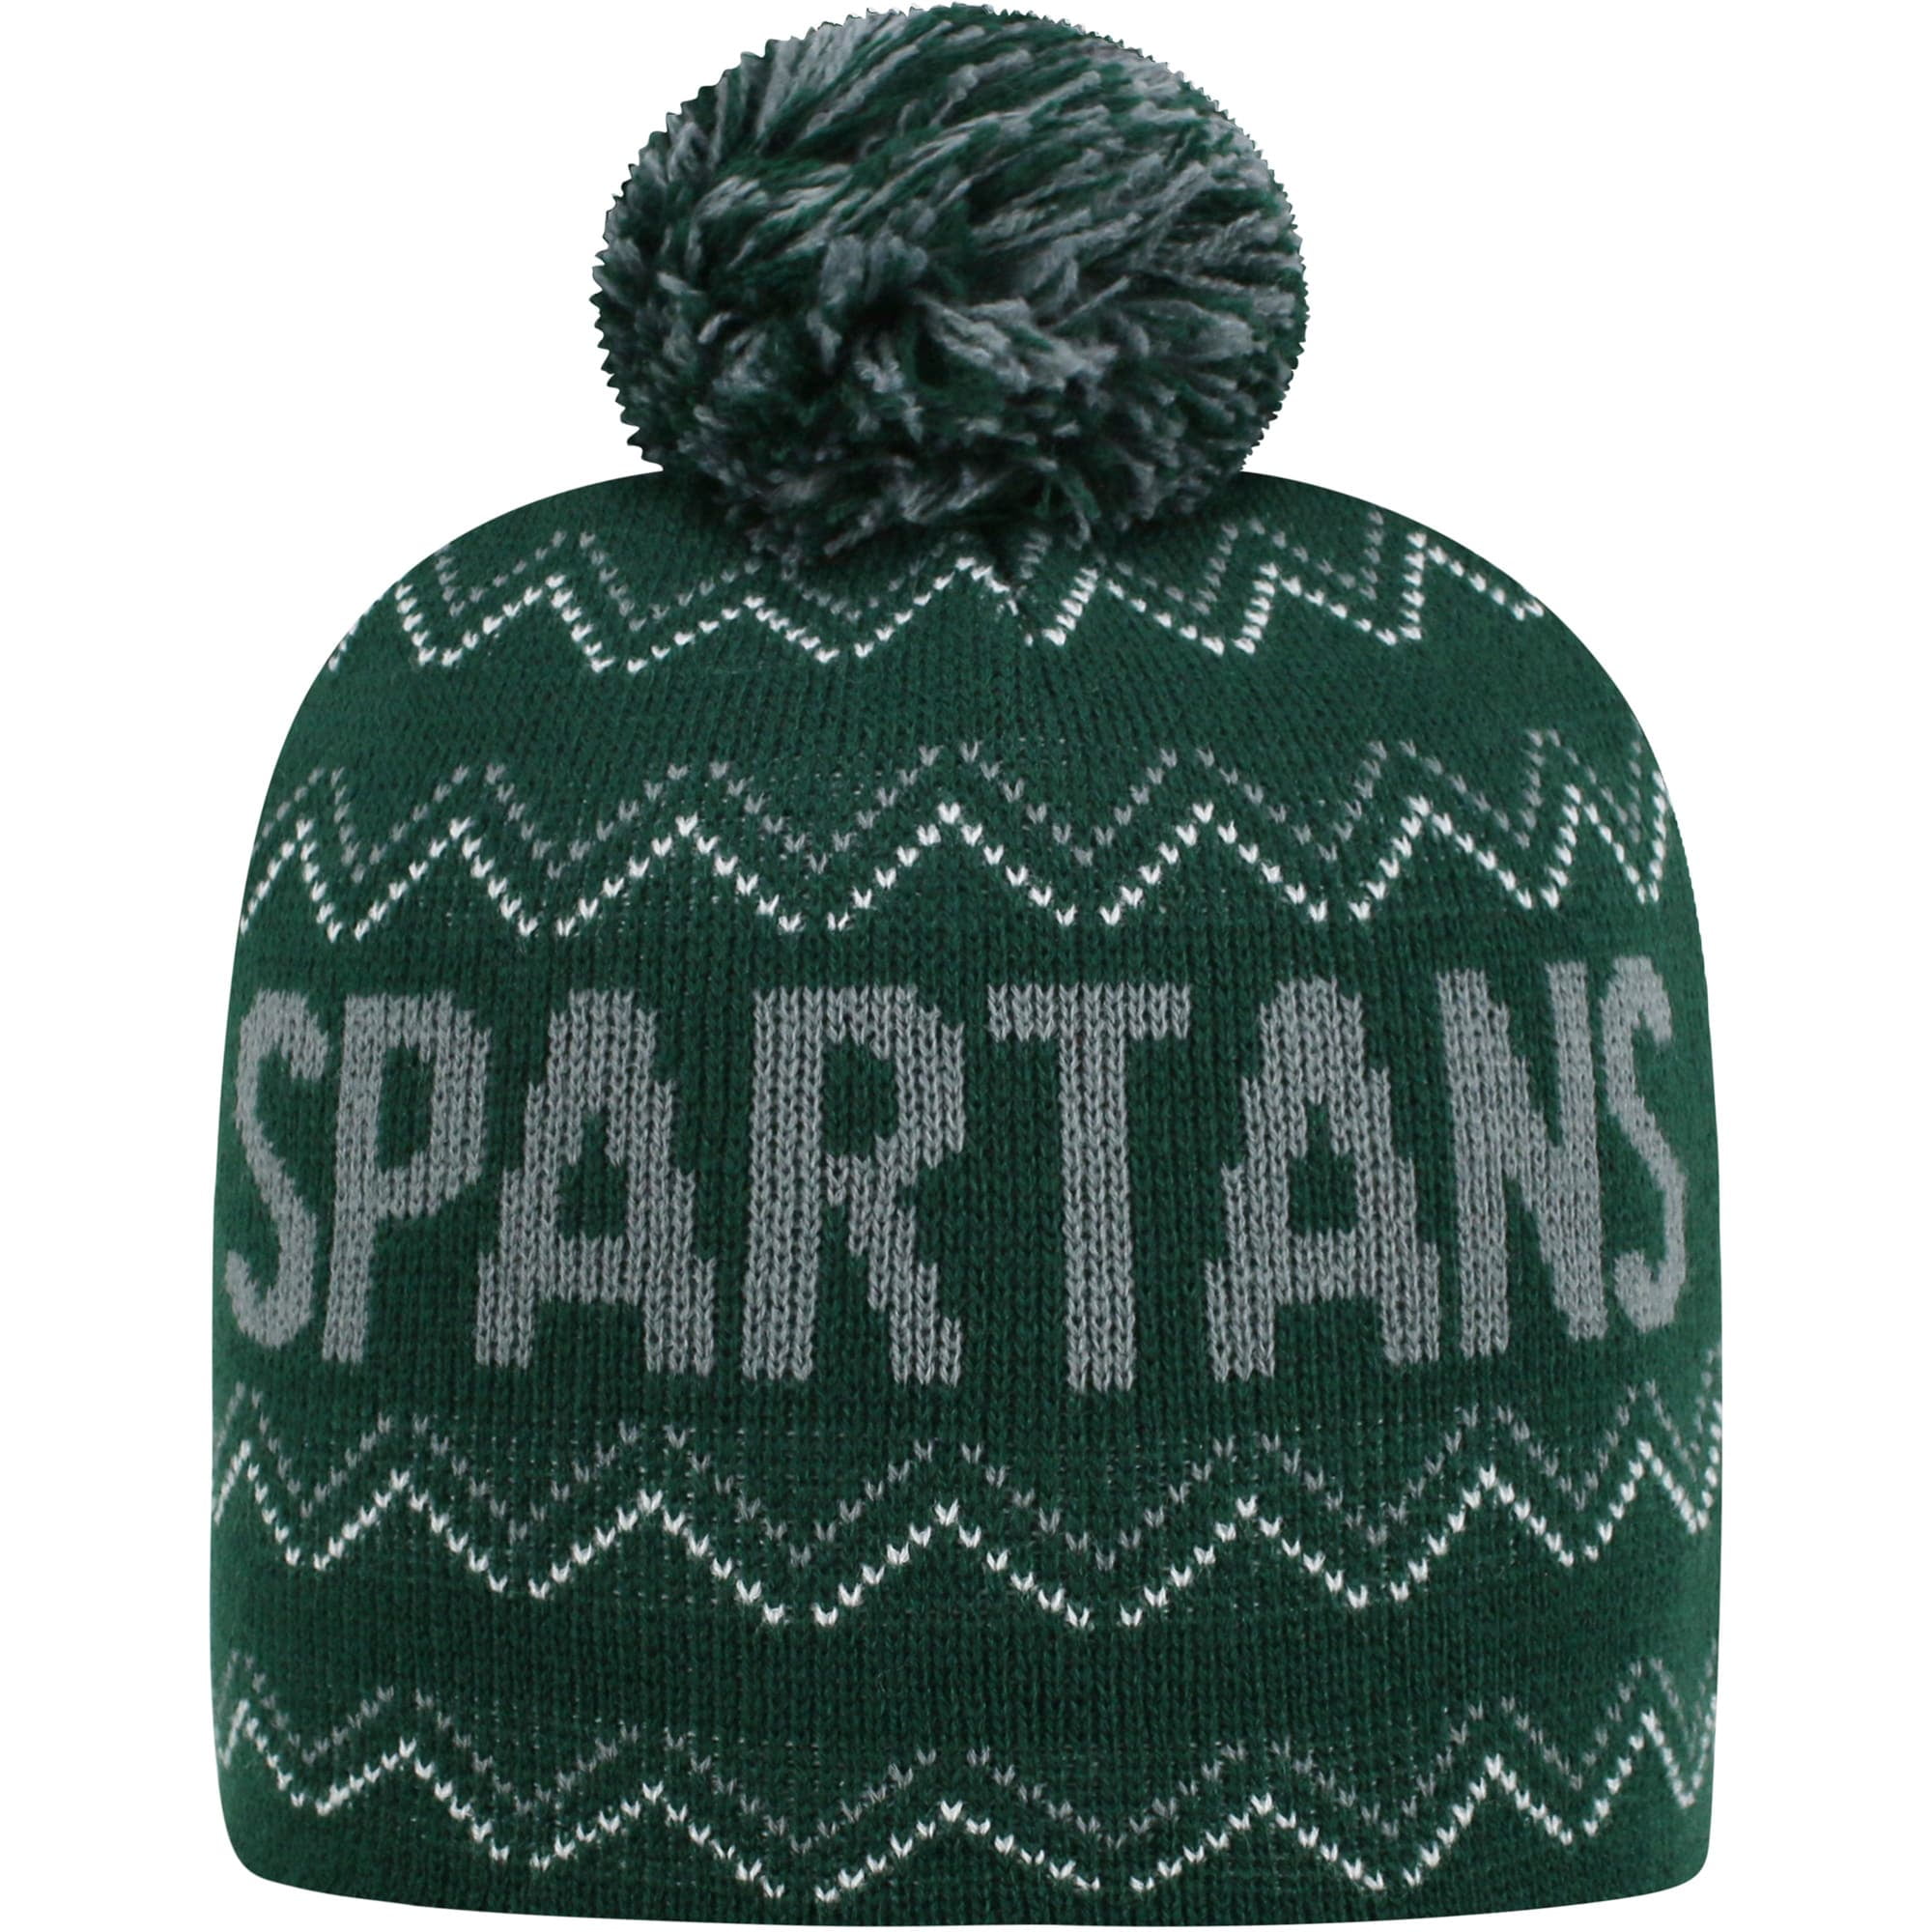 Top of the World Michigan State Spartans Official NCAA Cuffed Knit Advisory Stocking Stretch Sock Hat Cap Pom Beanie 457918